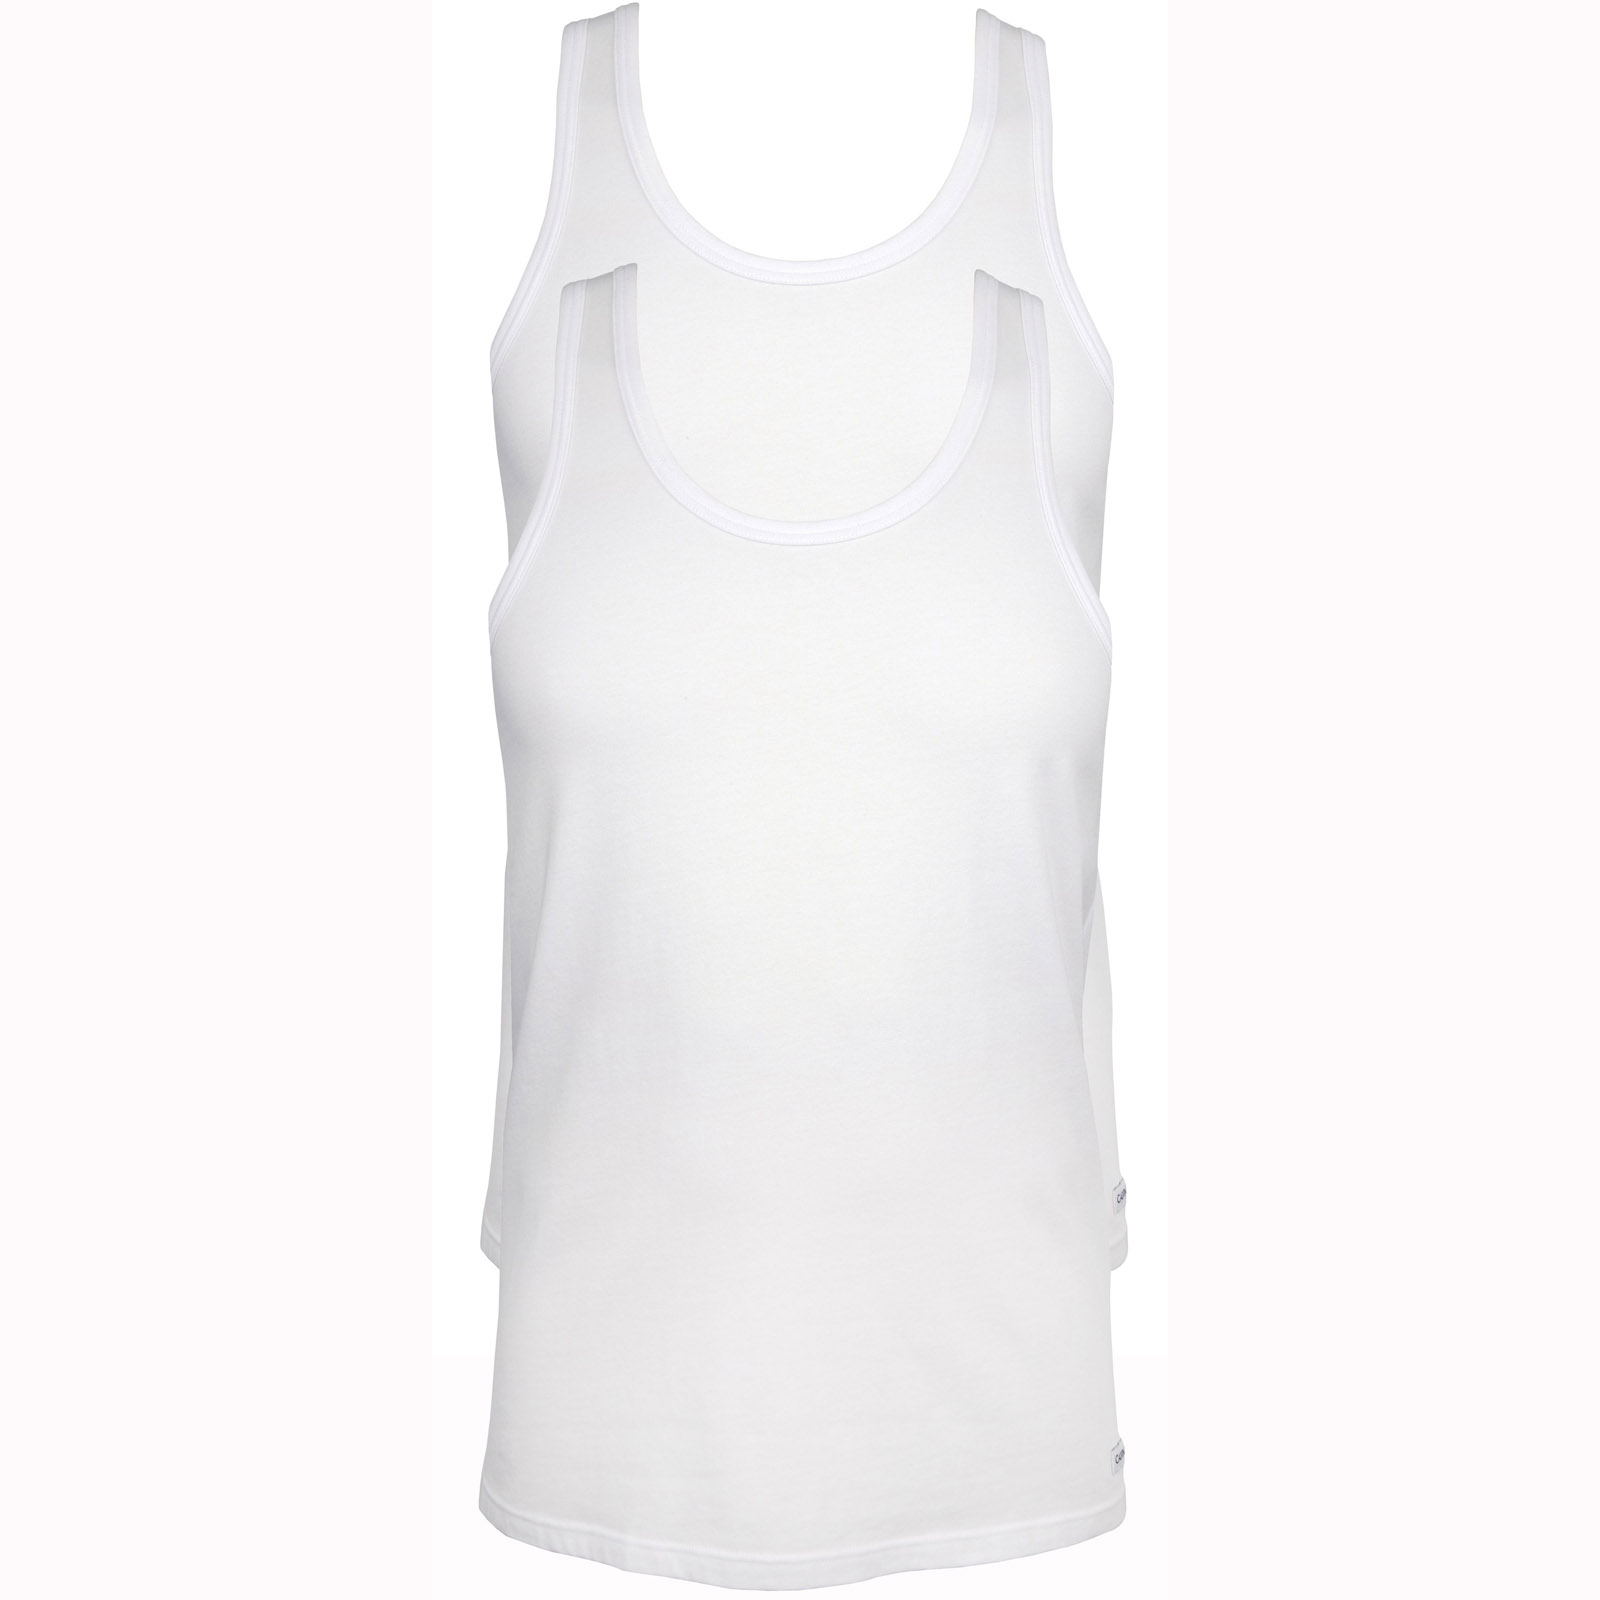 CK One Pack of 2 Tank Top